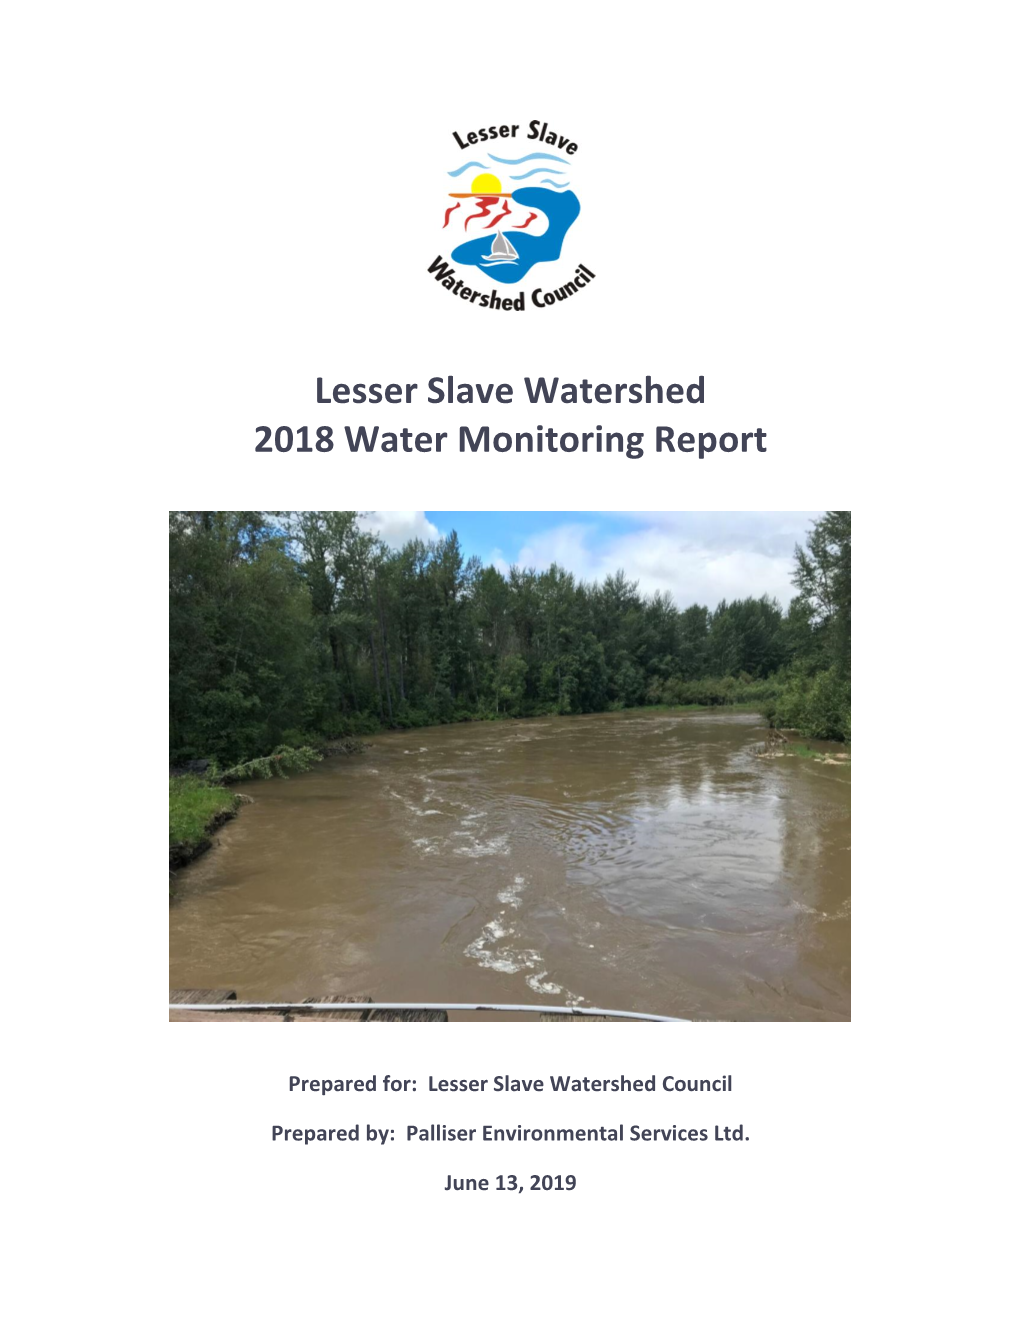 Lesser Slave Watershed 2018 Water Monitoring Report